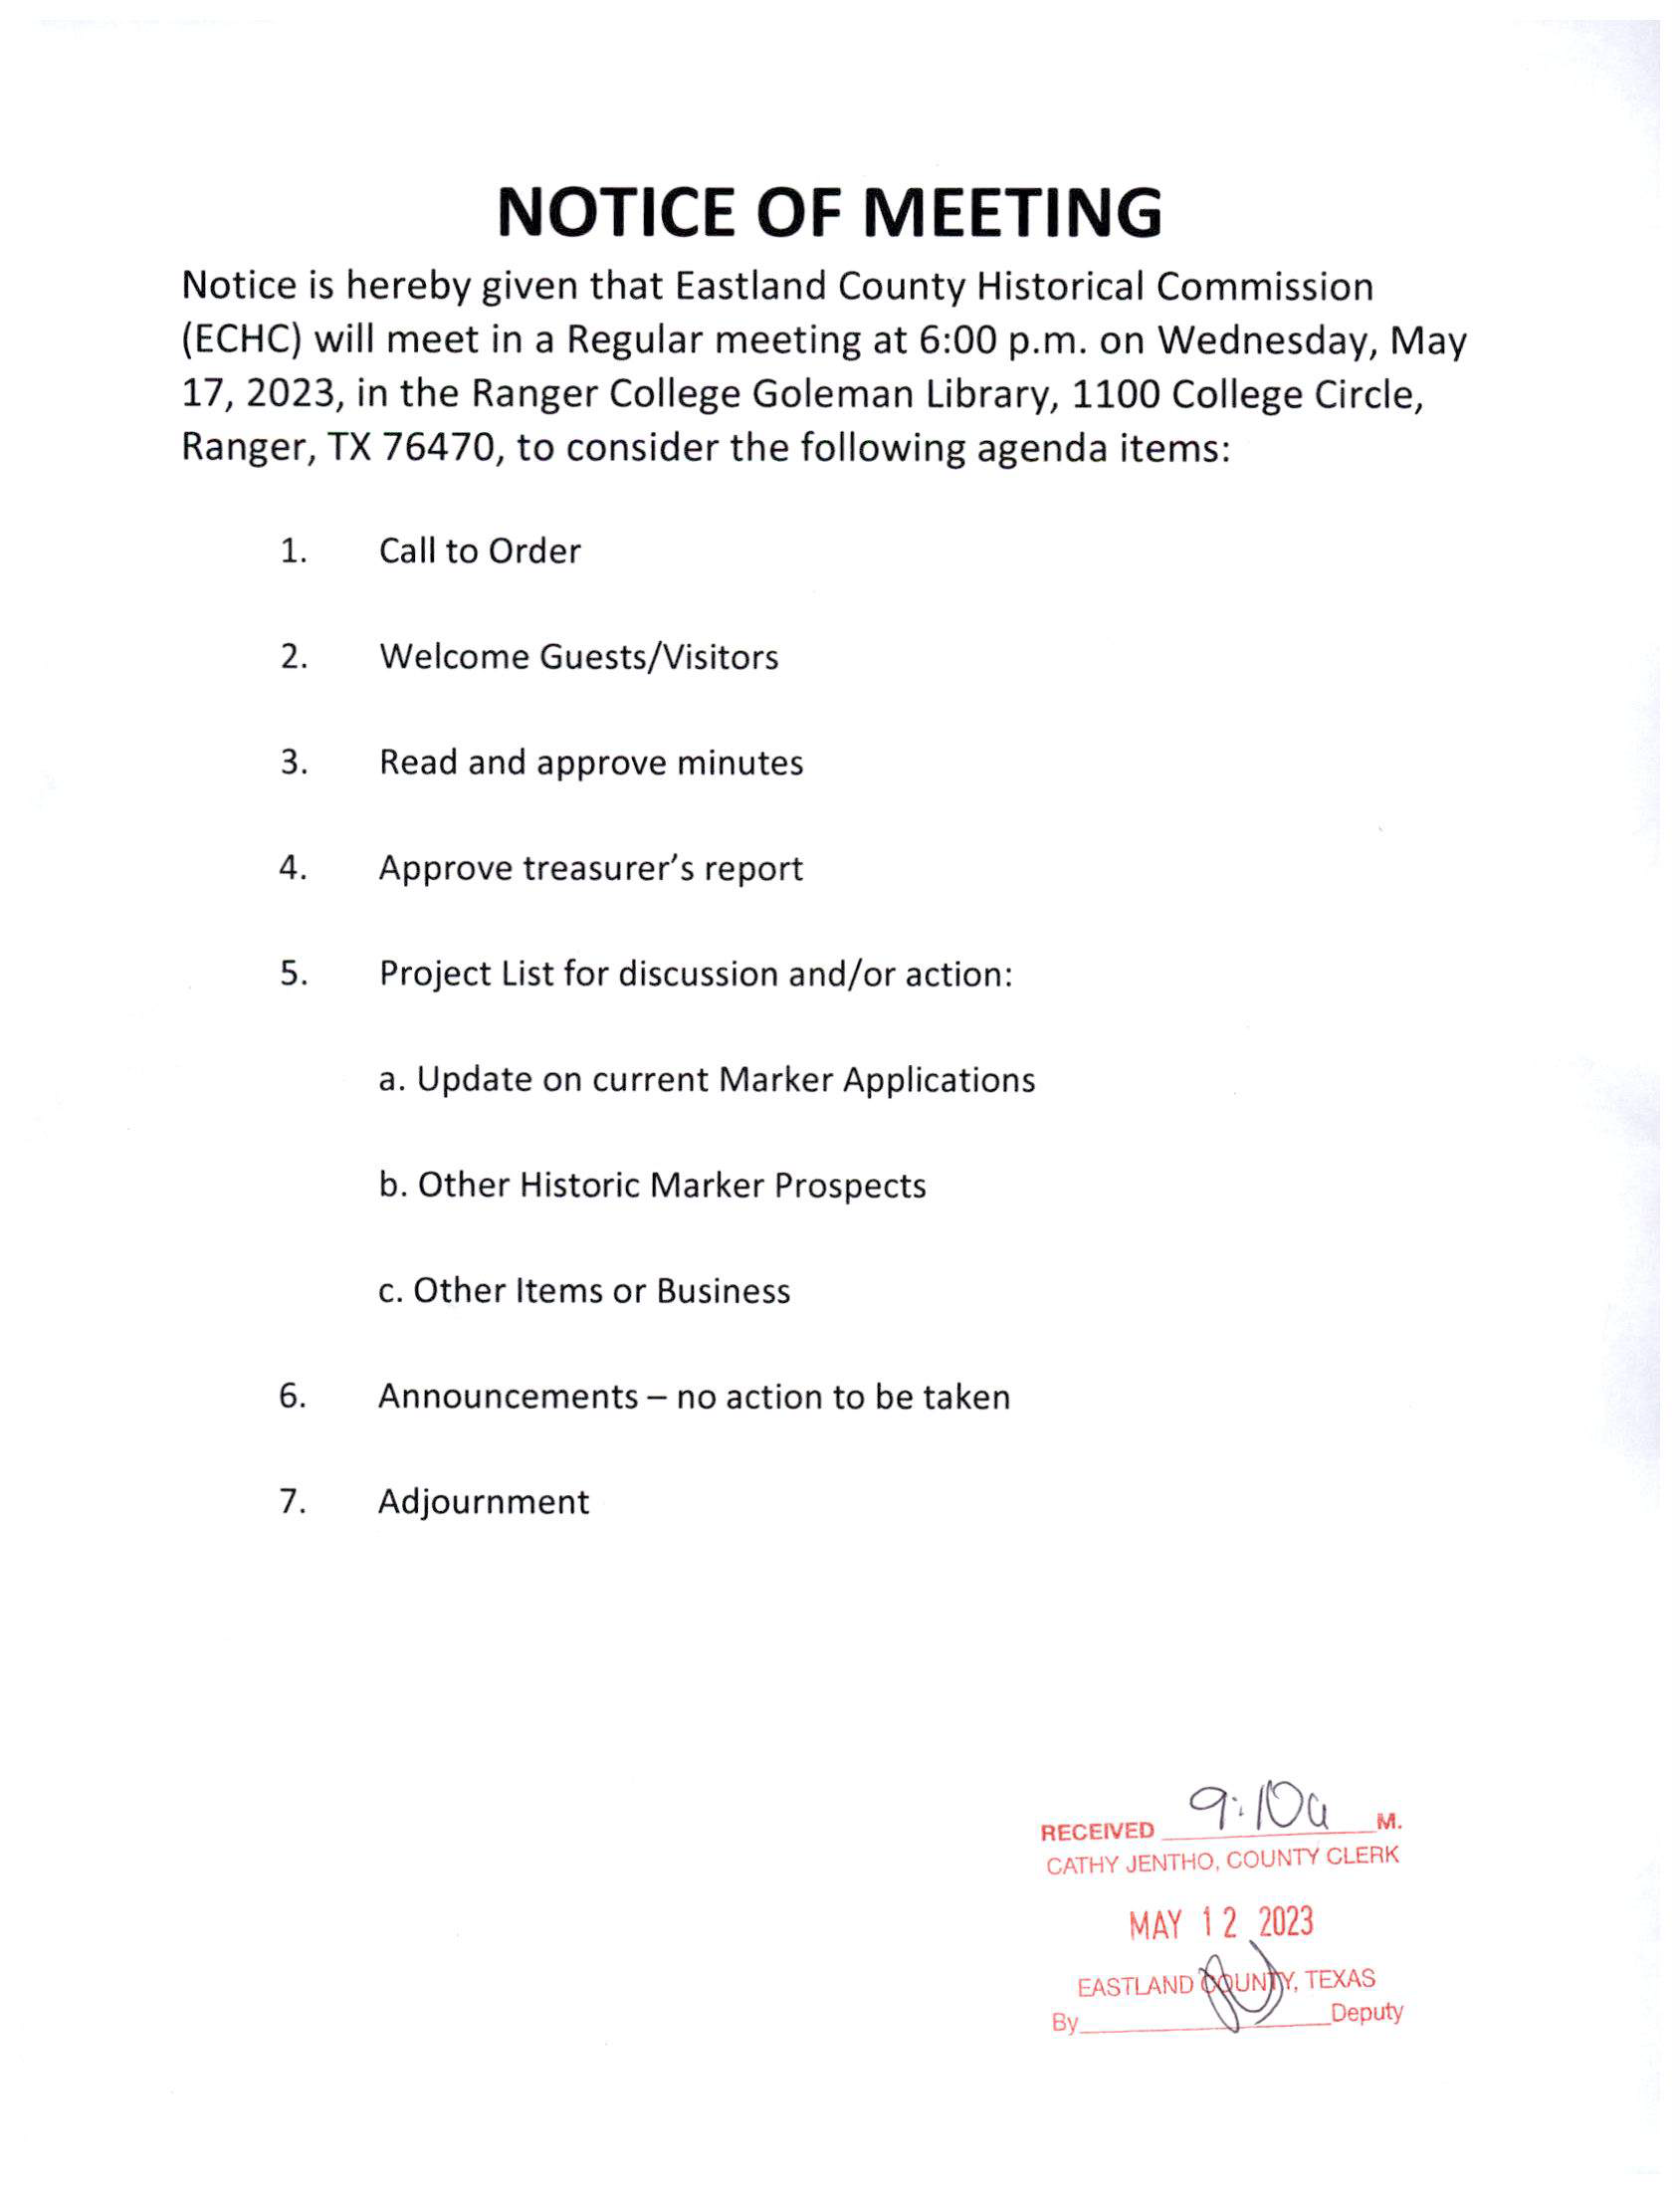 Agenda for a Regular Meeting of the Eastland County Historical Commission to be held on Wednesday, May 17, 2023...